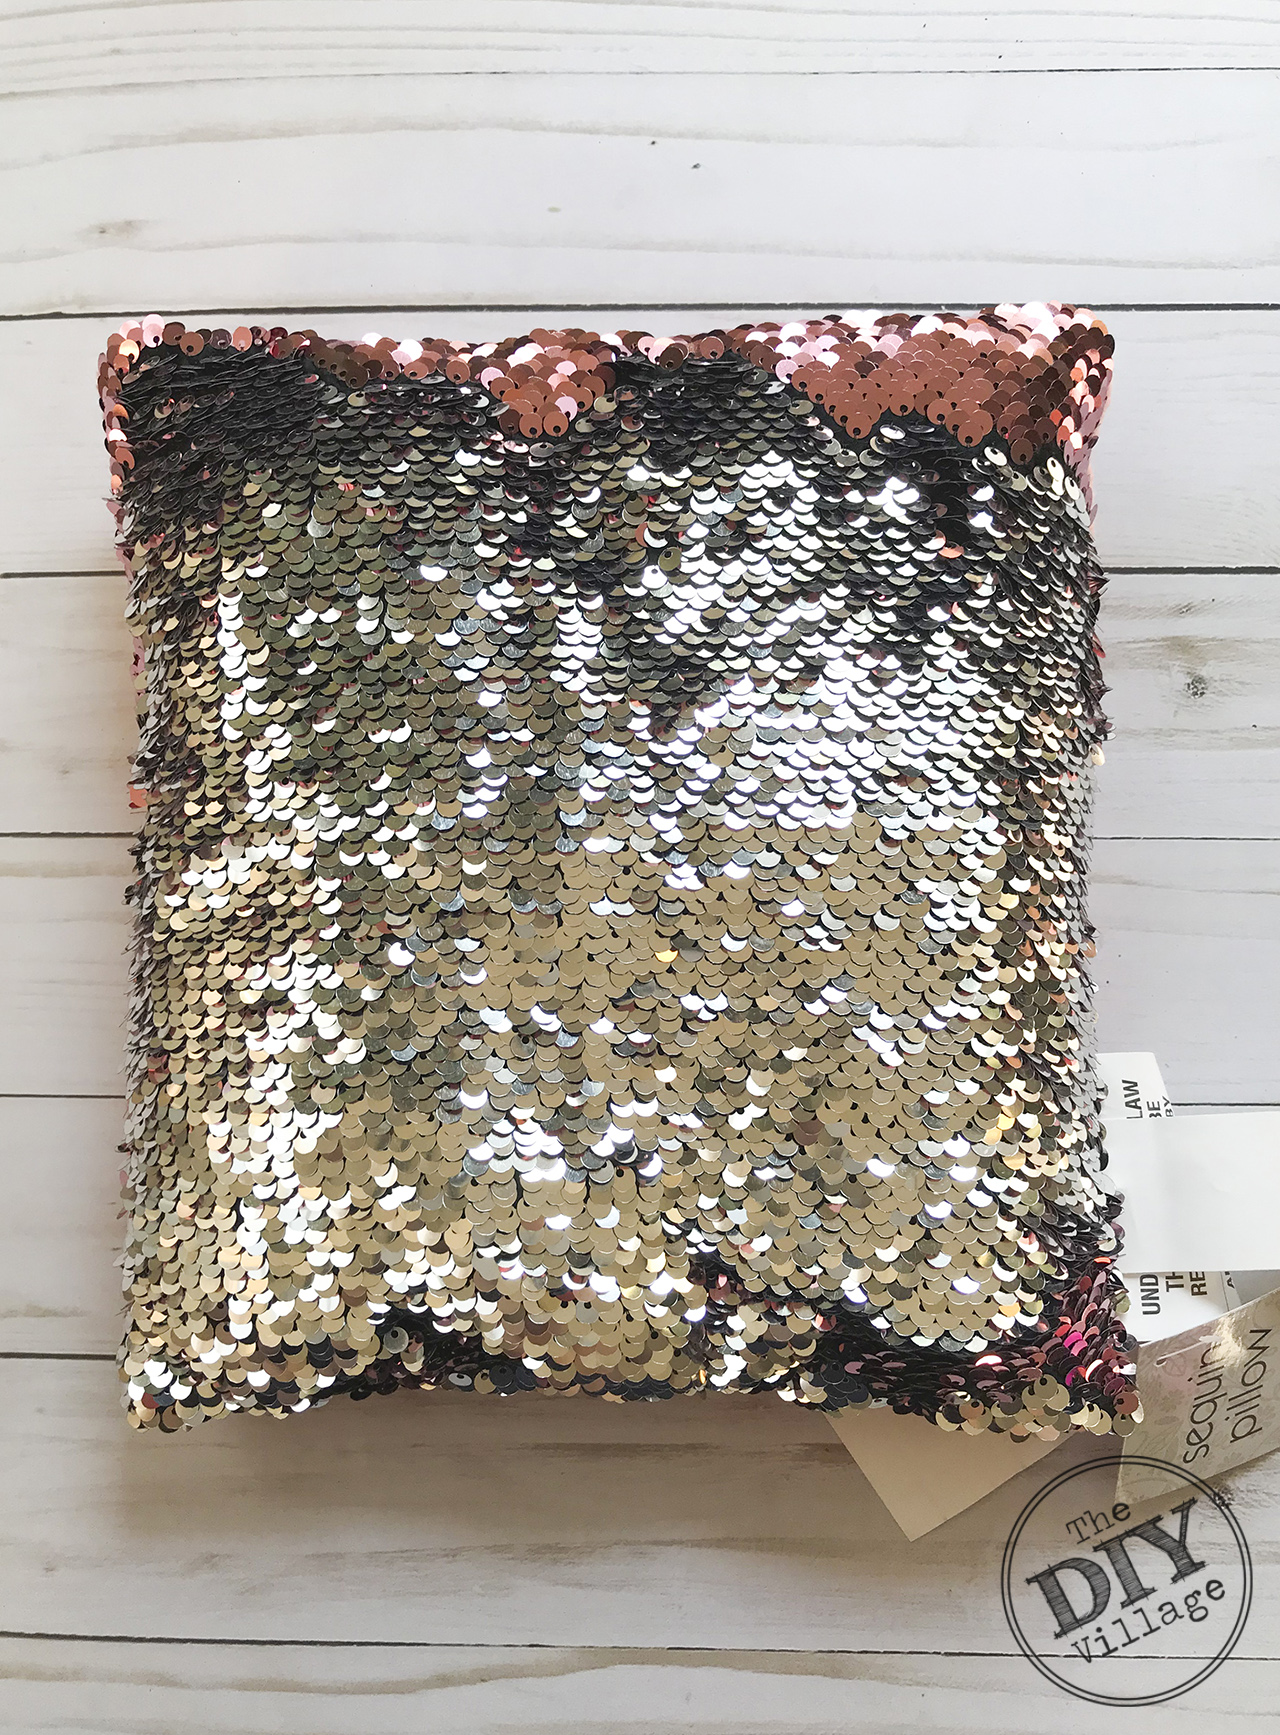 Easy Dollar Store Project - DIY Hidden Message sequin Pillow. They can be personalized with names, messages, anything! Such a fun idea. #hiddenmessagepillow #diycraft #sequinpillow #personalizedgift #monogrmamedgift #bling #sparkle #dollarstorecraft #dollarstorechallenge #fastcraft